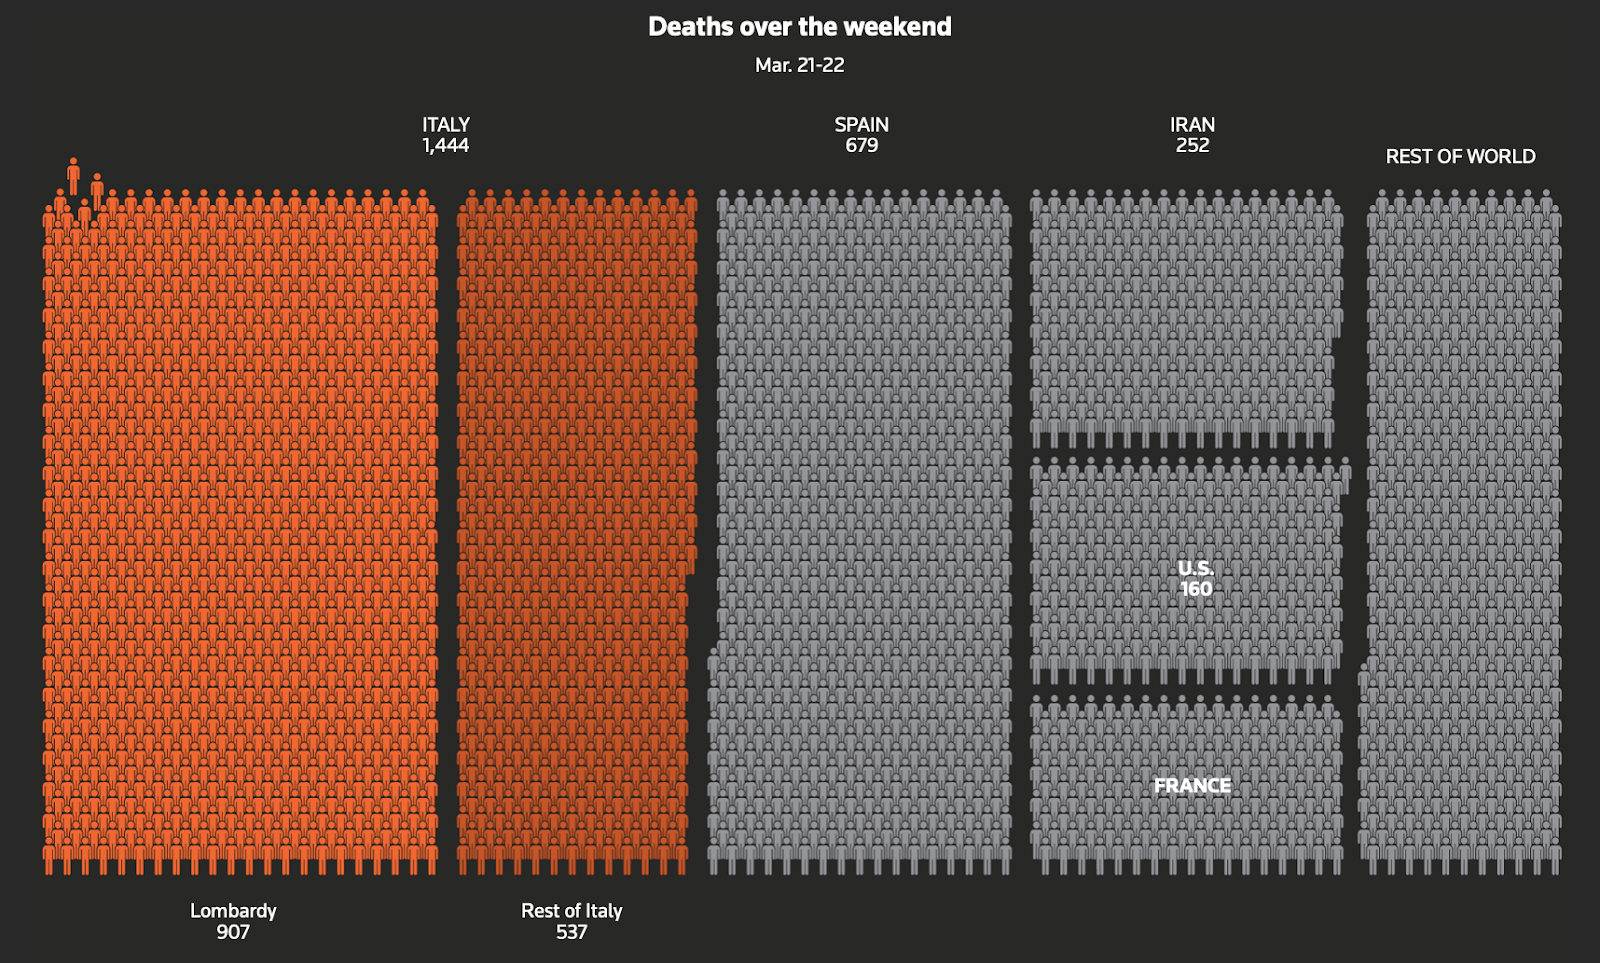 Reuter's data visualization illustrtrating Italy's Covid-19 deaths betweenm March 21-22.